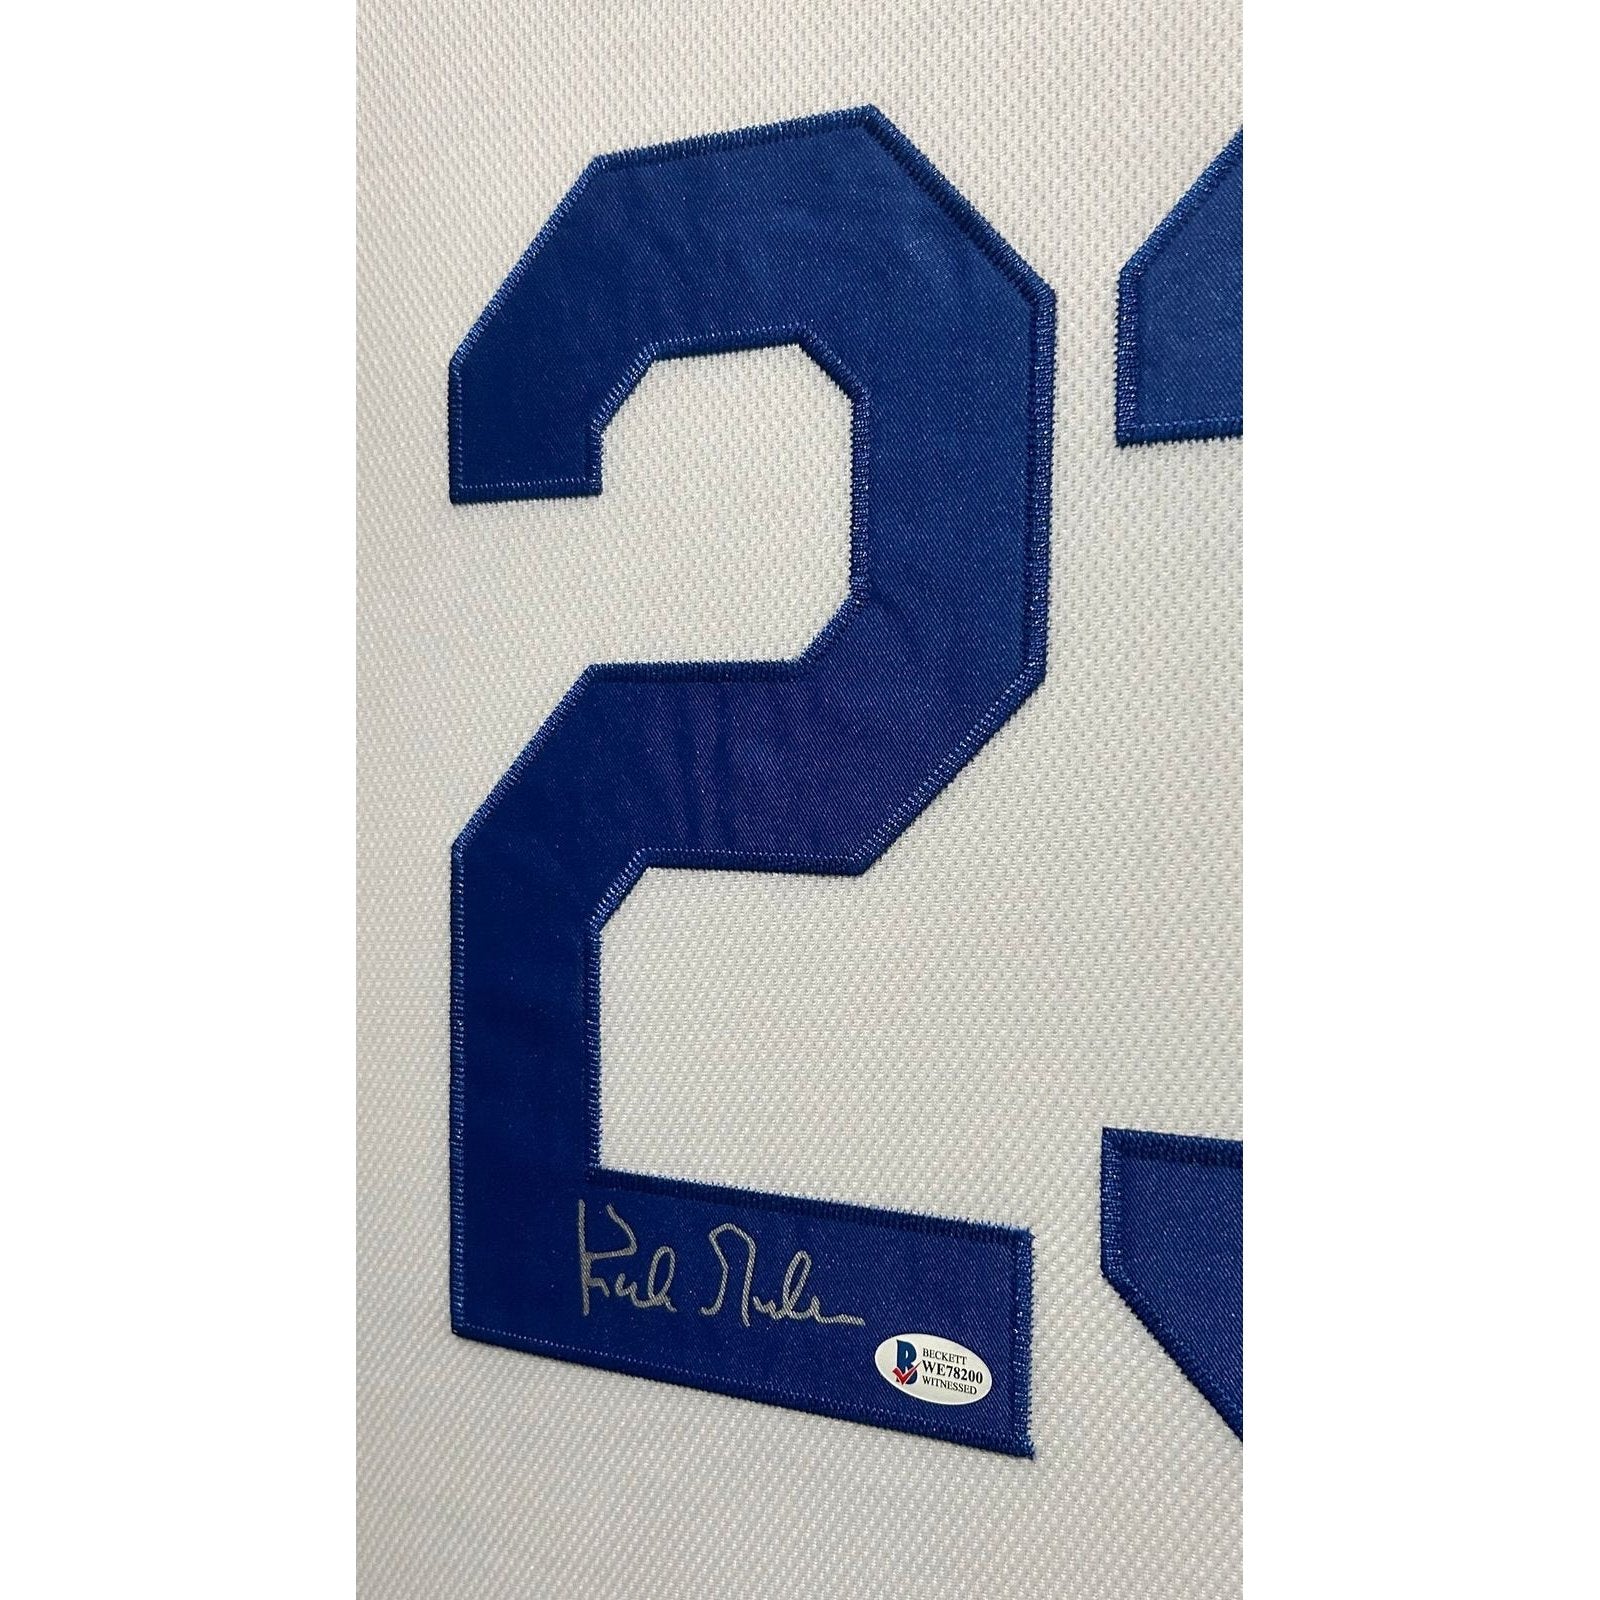 Kirk Gibson Autographed Jerseys, Signed Kirk Gibson Inscripted Jerseys